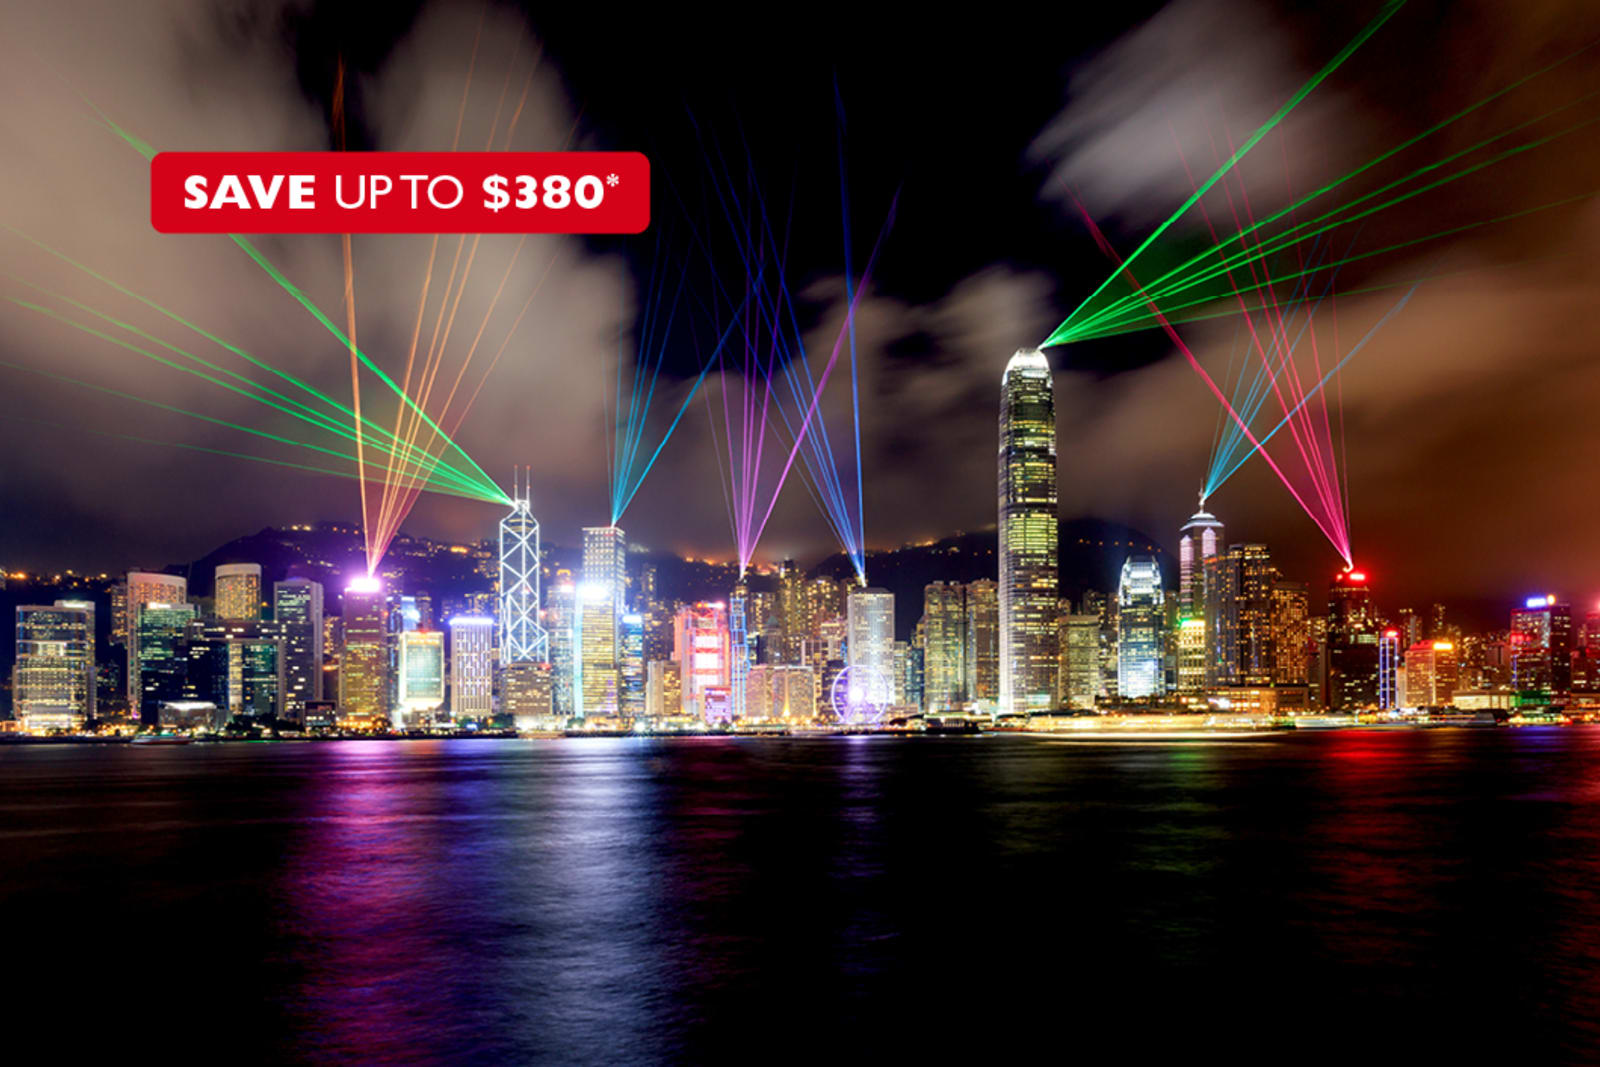 The Symphony of Lights show over Victoria Harbour in Hong Kong